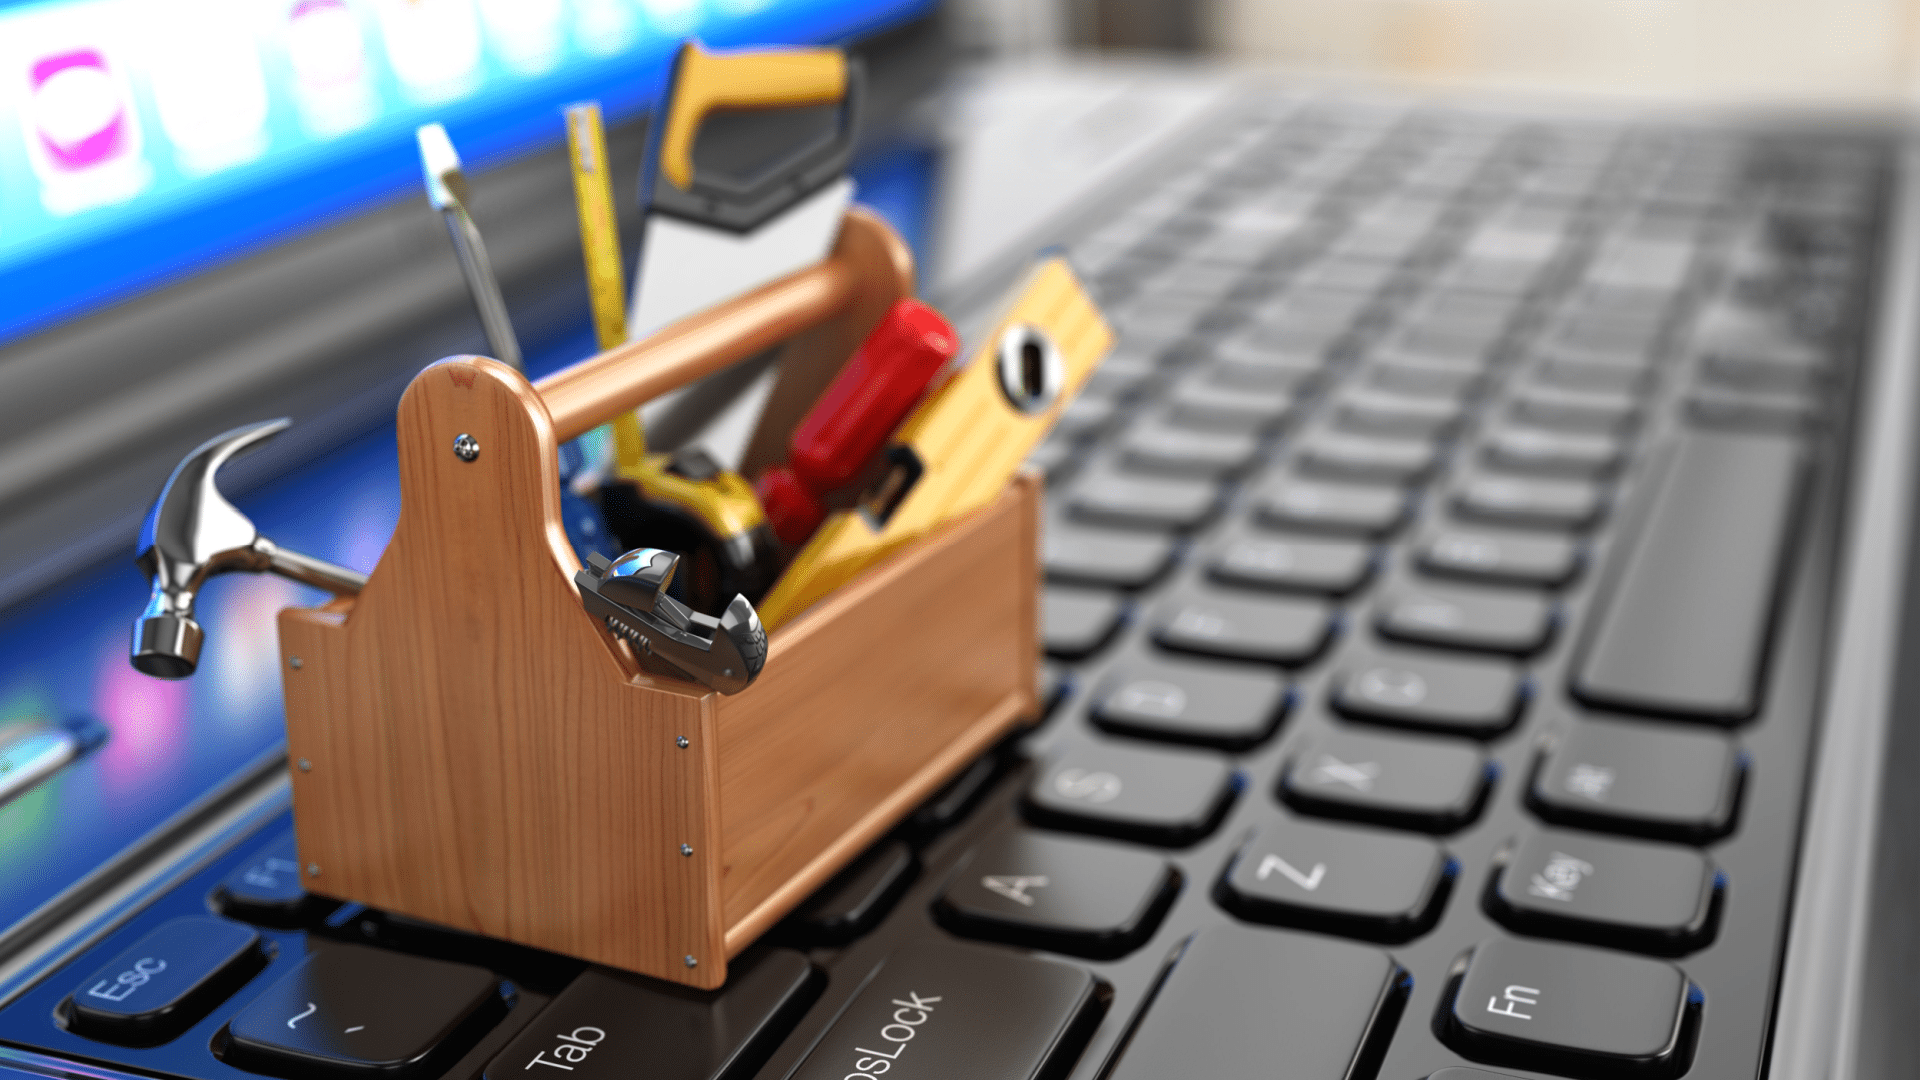 5 free SEO tools and plugins to try